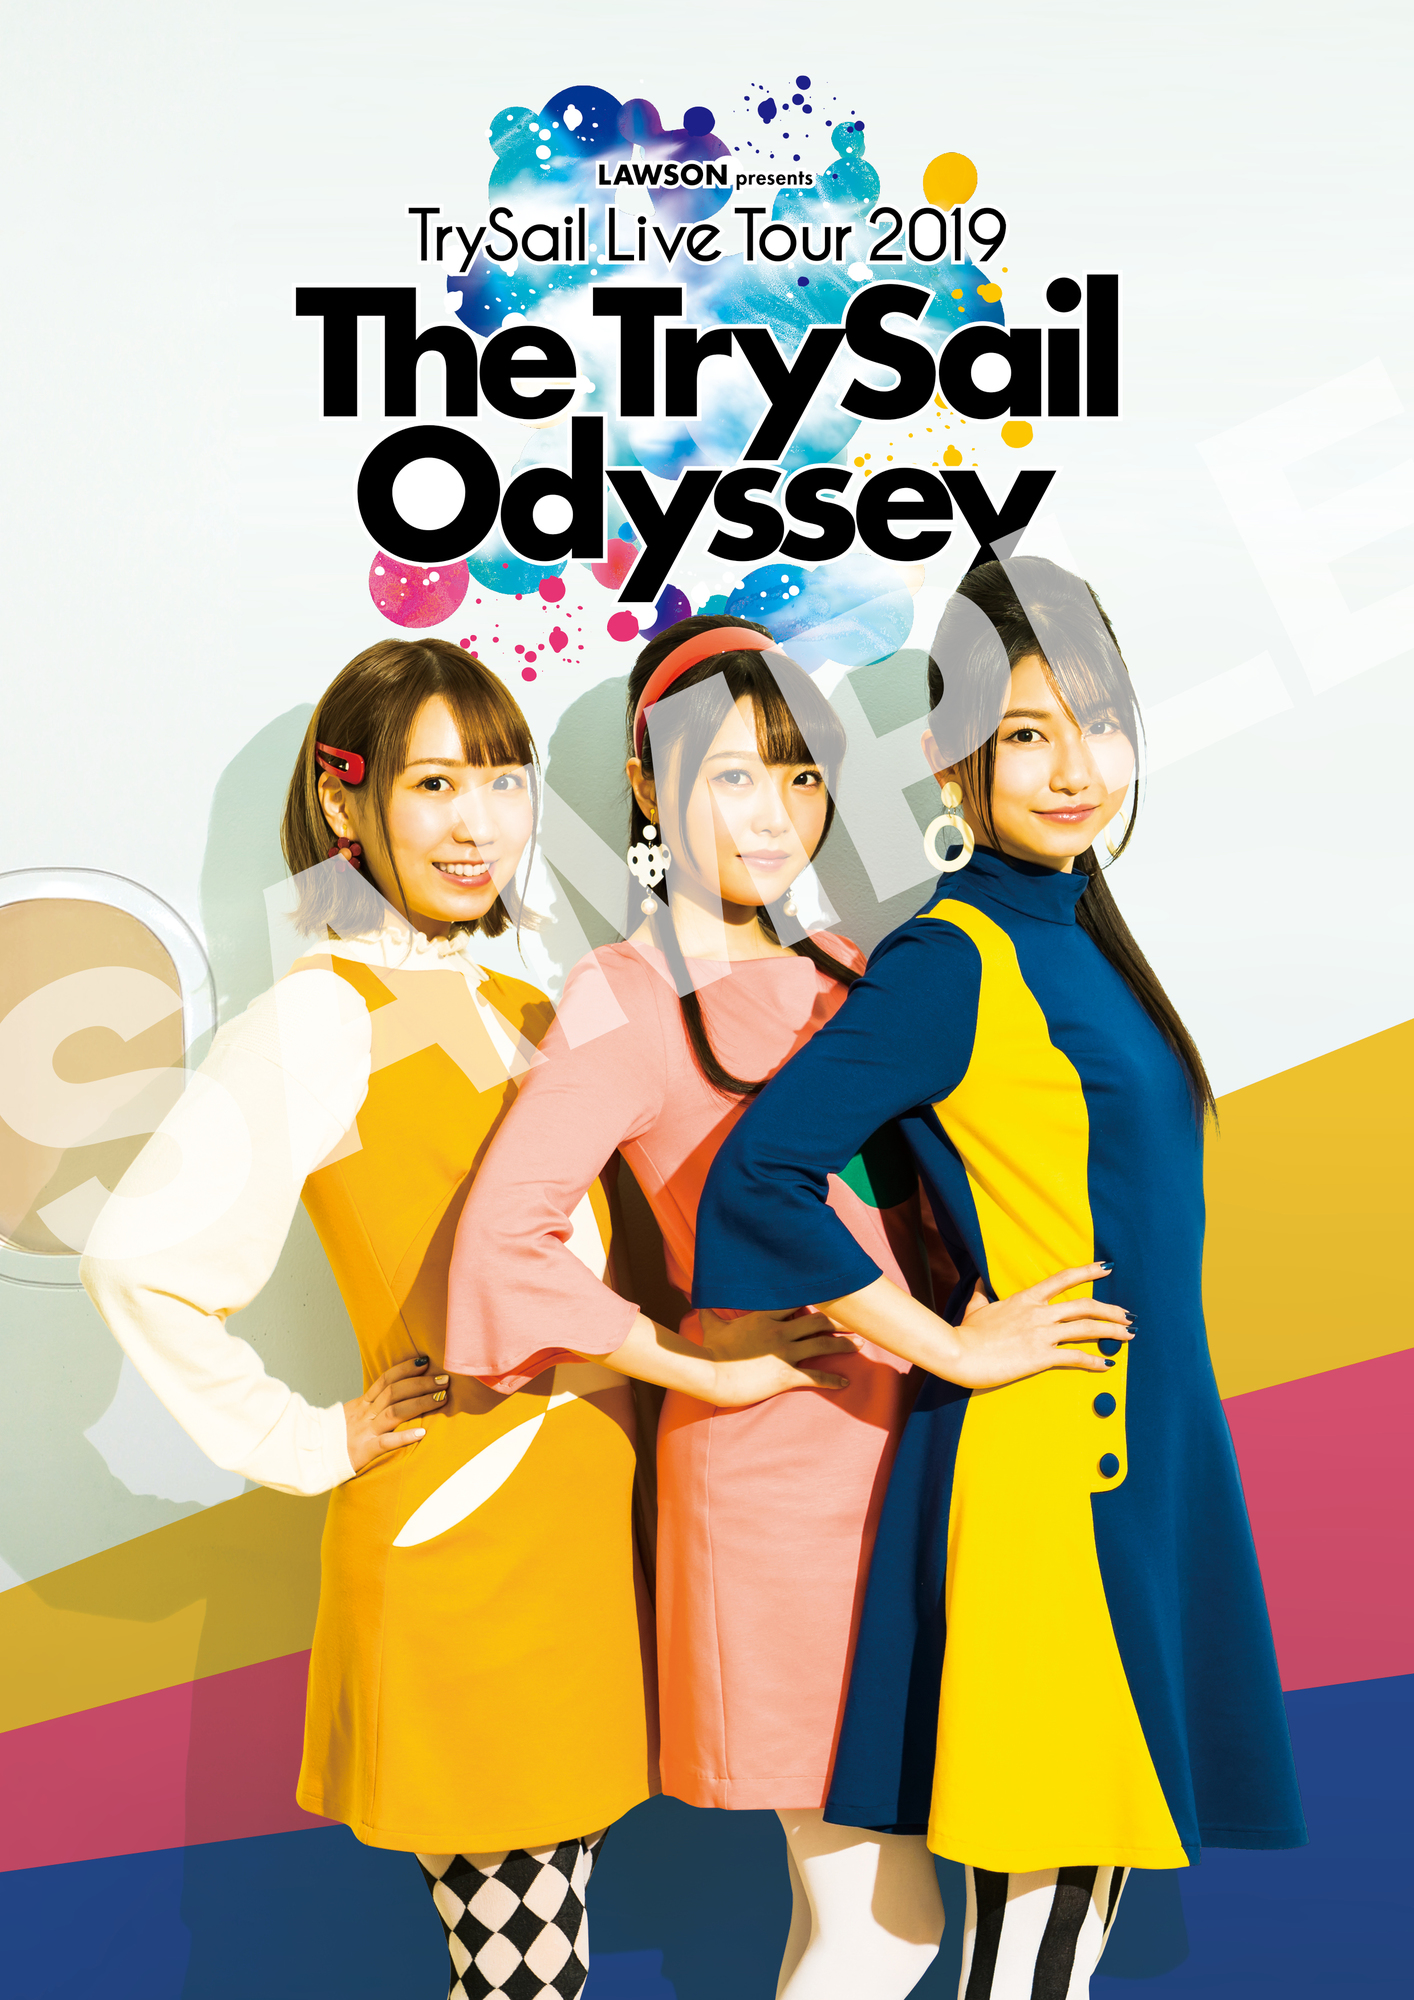 LAWSON presents TrySail Live Tour 2019 